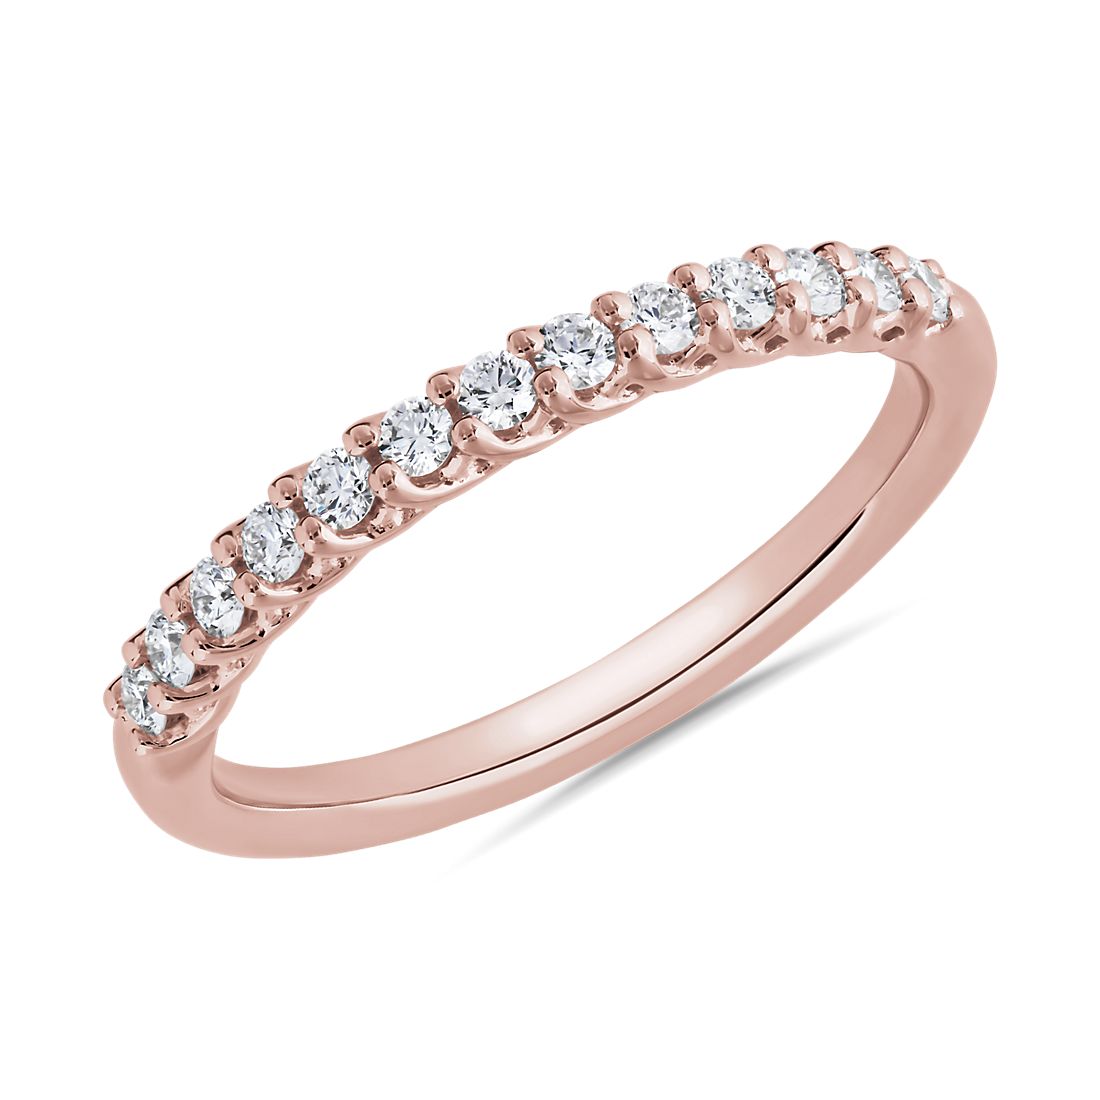 Tessere Weave Diamond Anniversary Band in 14k Rose Gold (0.24 ct. tw.)